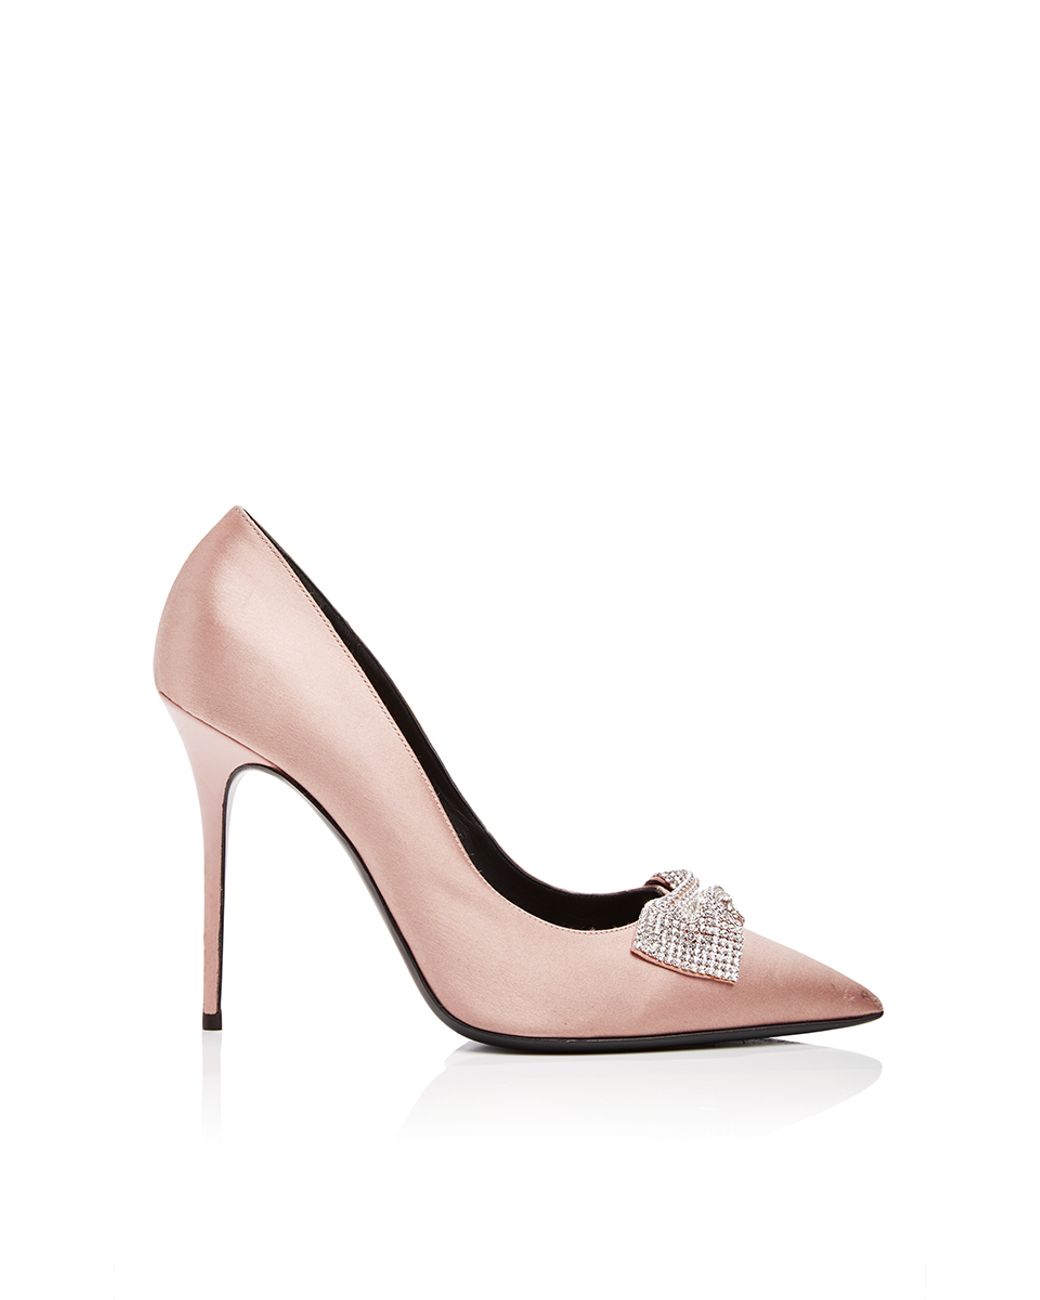 Giuseppe Zanotti Silk Satin Pumps With Crystal Bow in Natural | Lyst